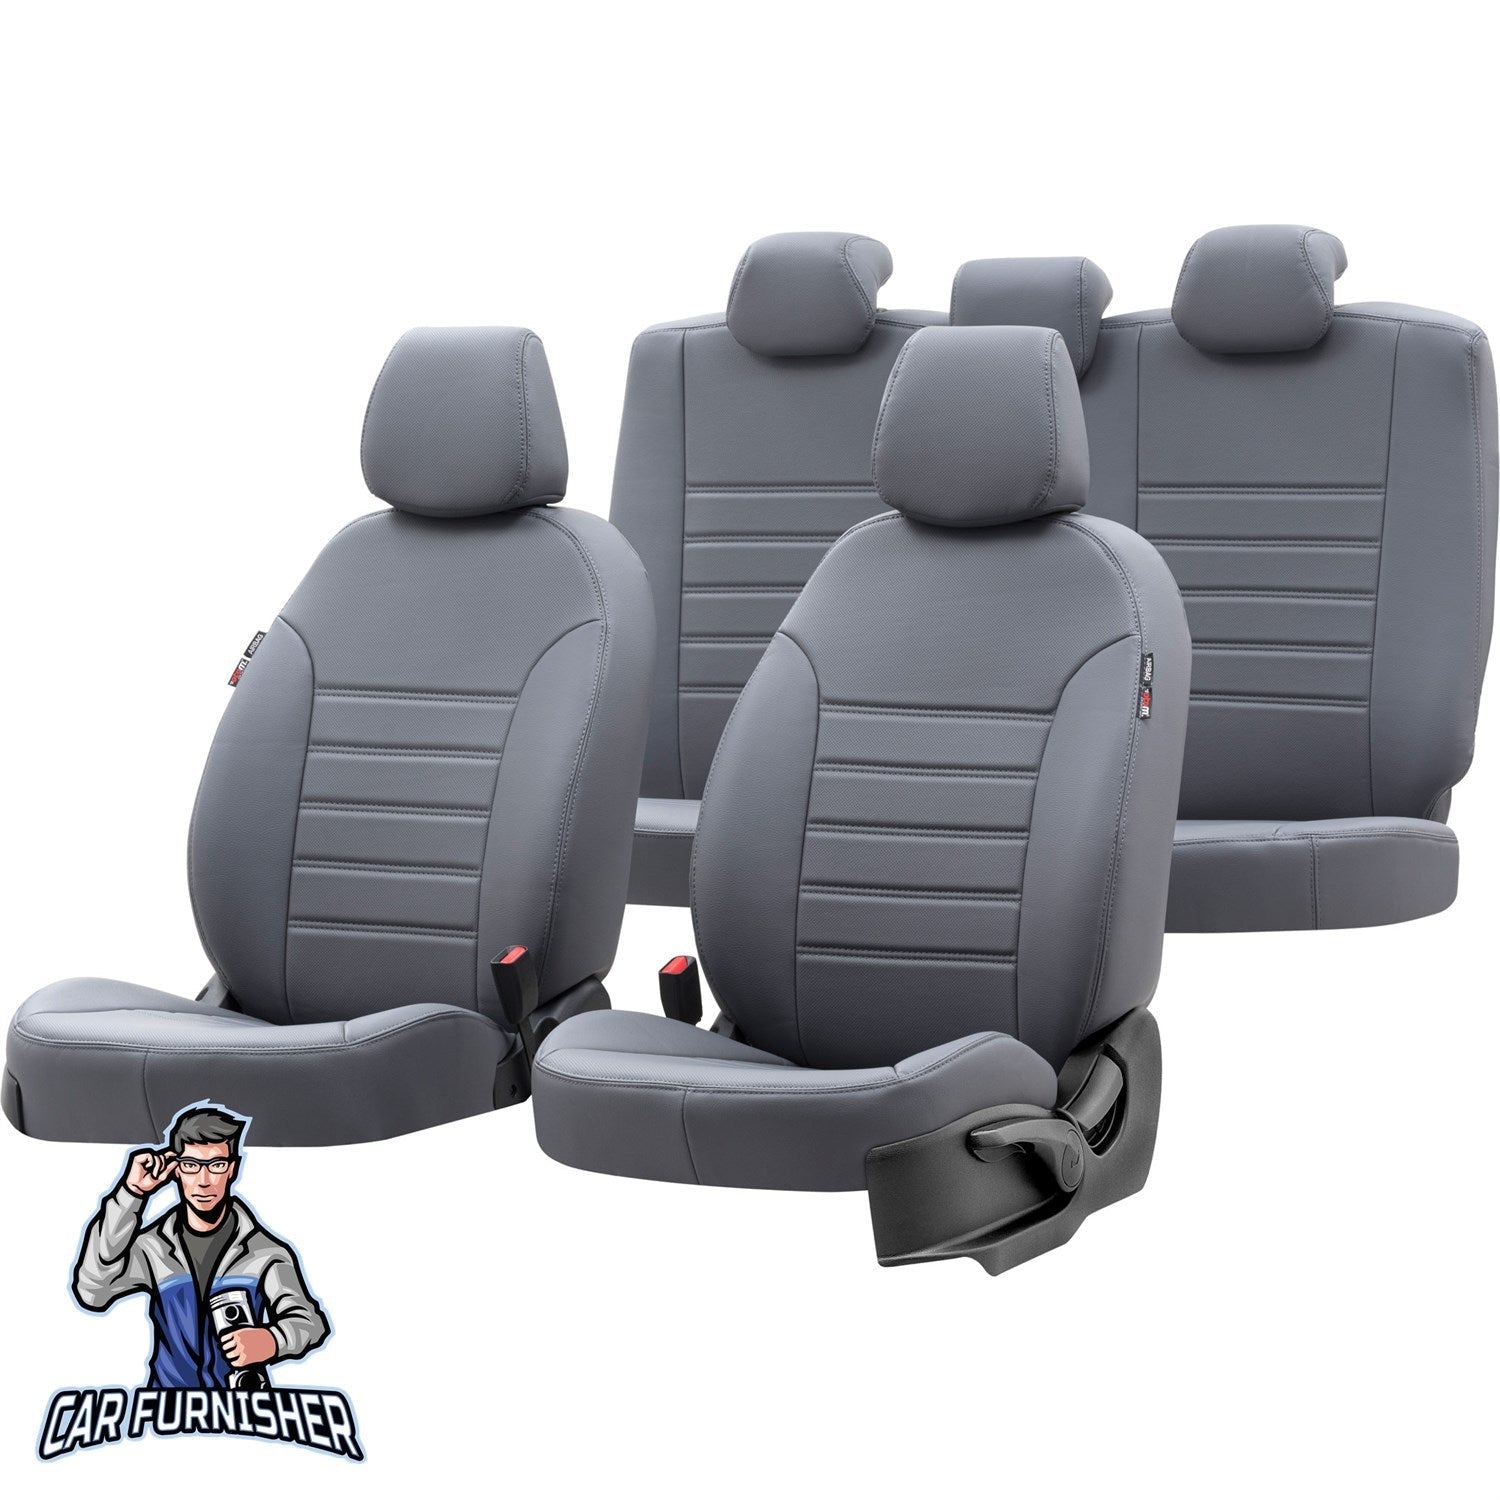 Chevrolet Tahoe Car Seat Covers 2007-2014 GMT/LS/LTZ Istanbul Smoked Full Set (5 Seats + Handrest) Leather & Fabric